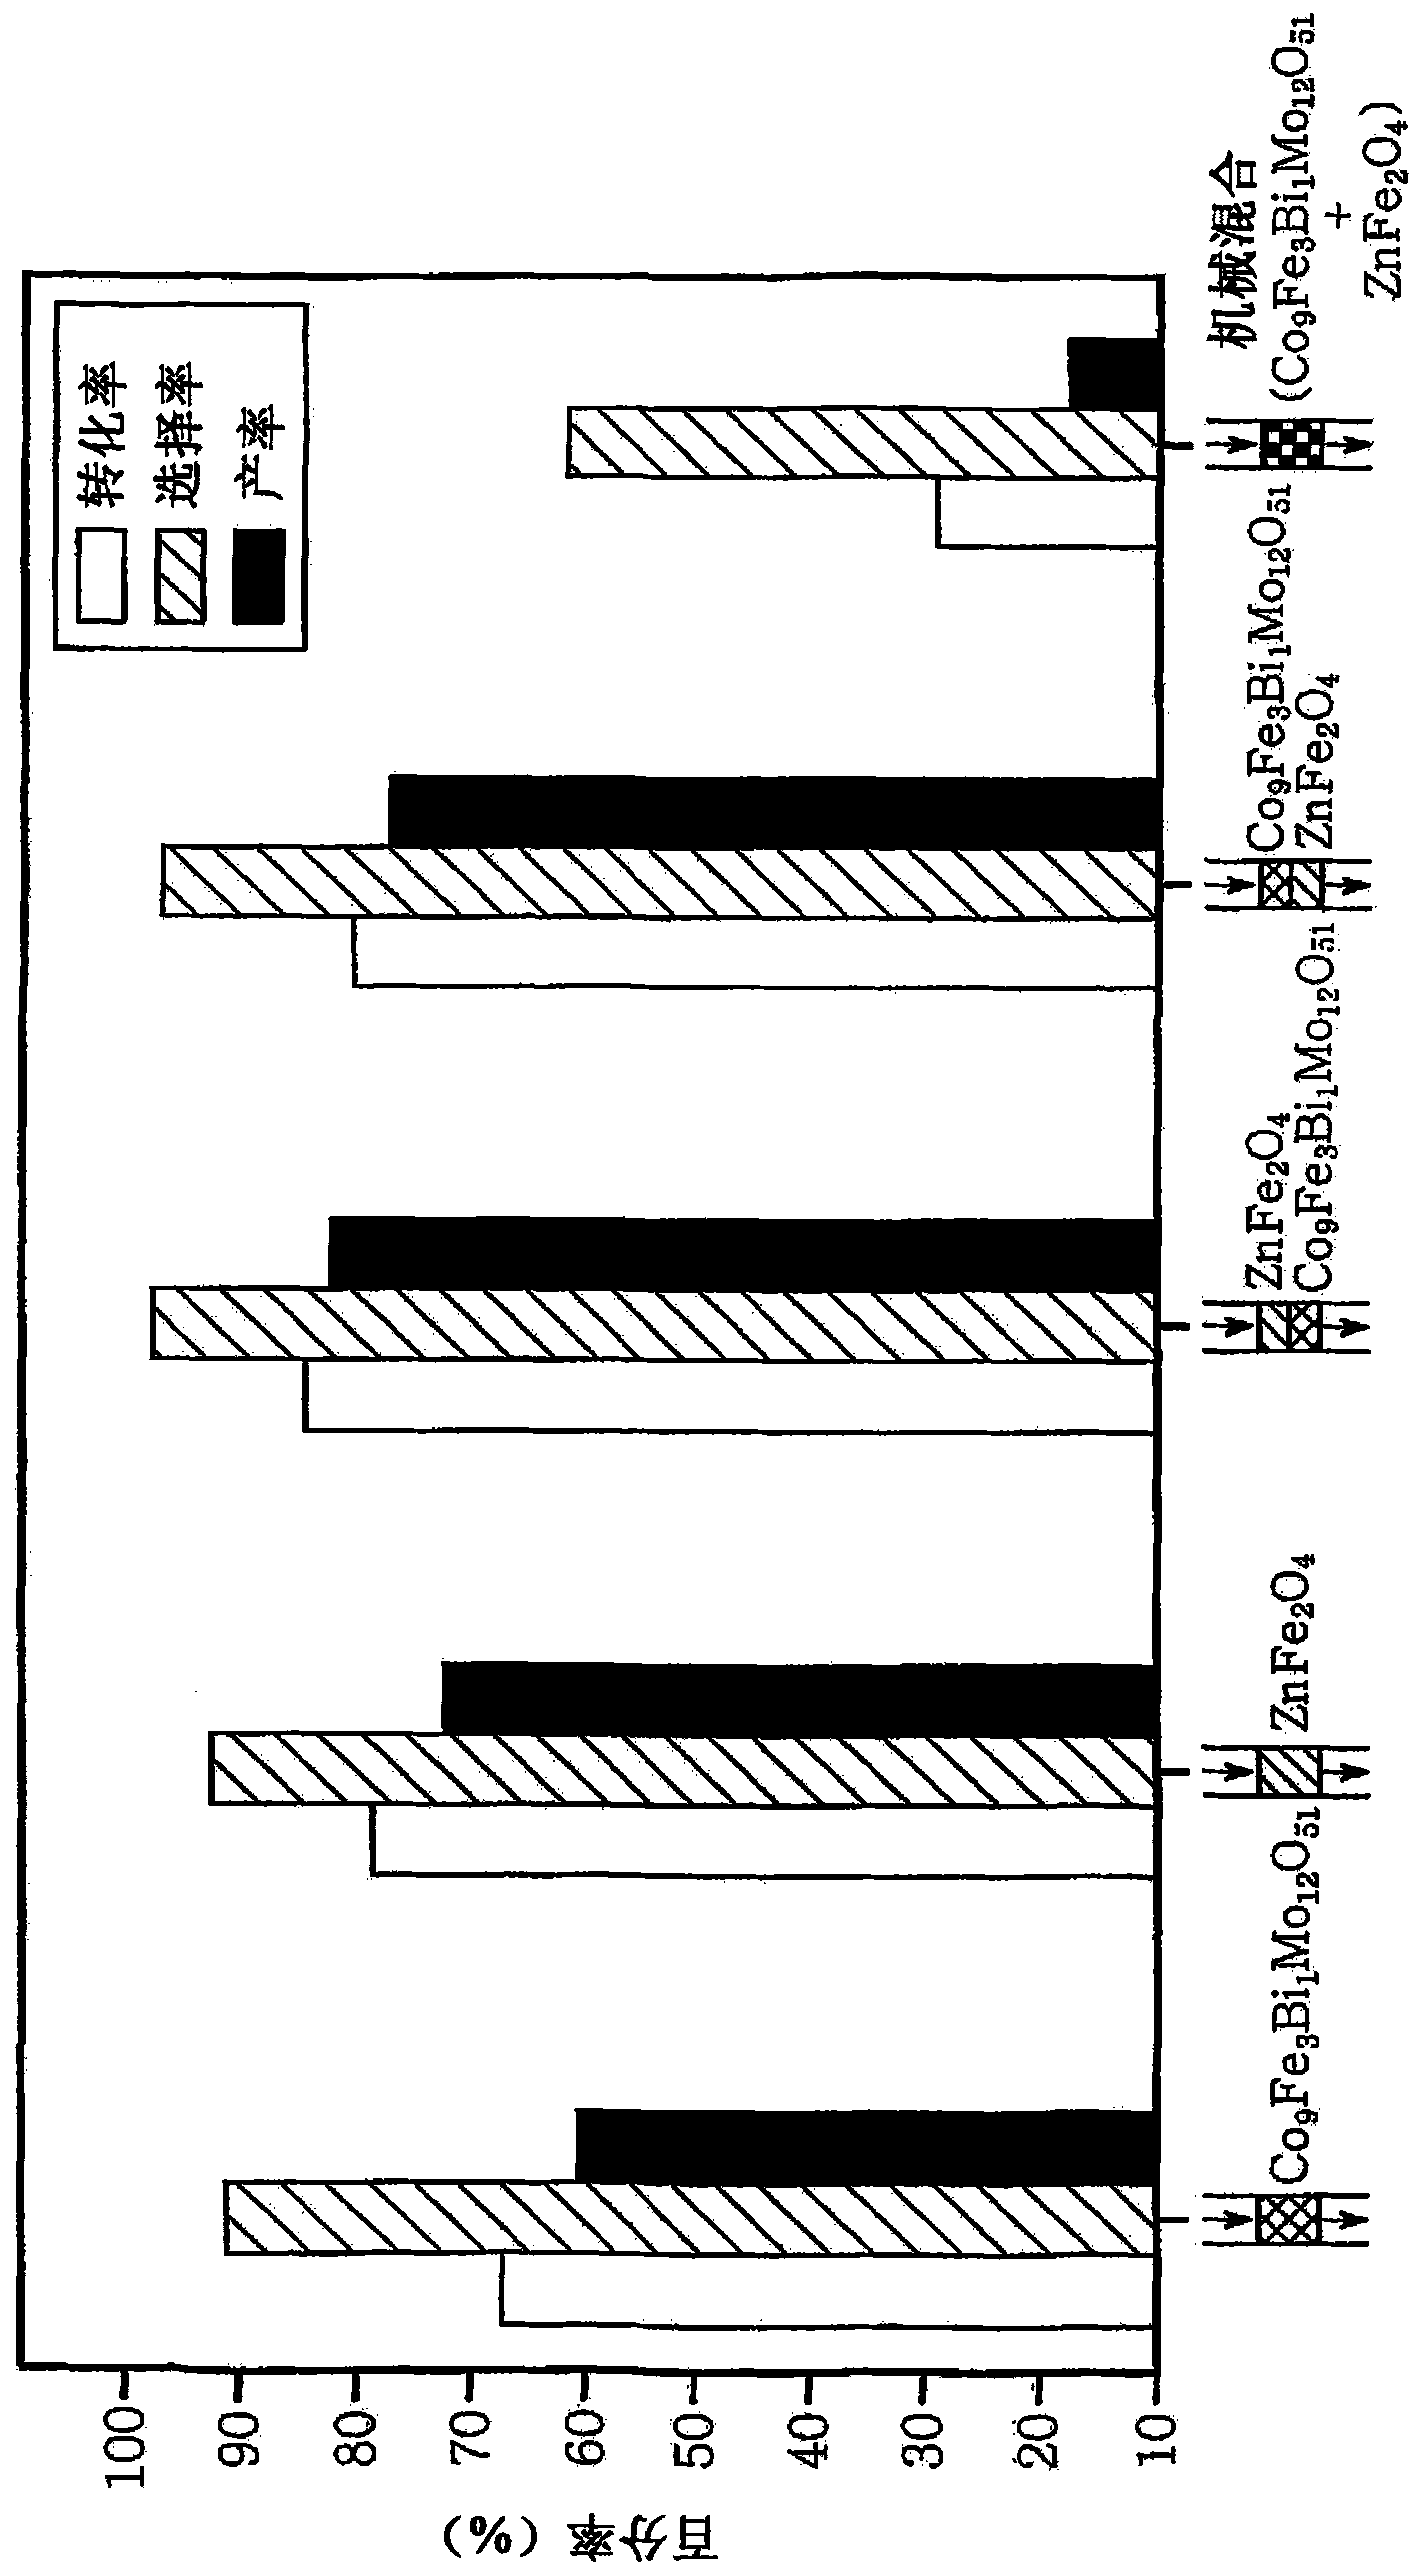 Method for preparing 1,3-butadiene from normal butene by using continuous-flow dual-bed reactor